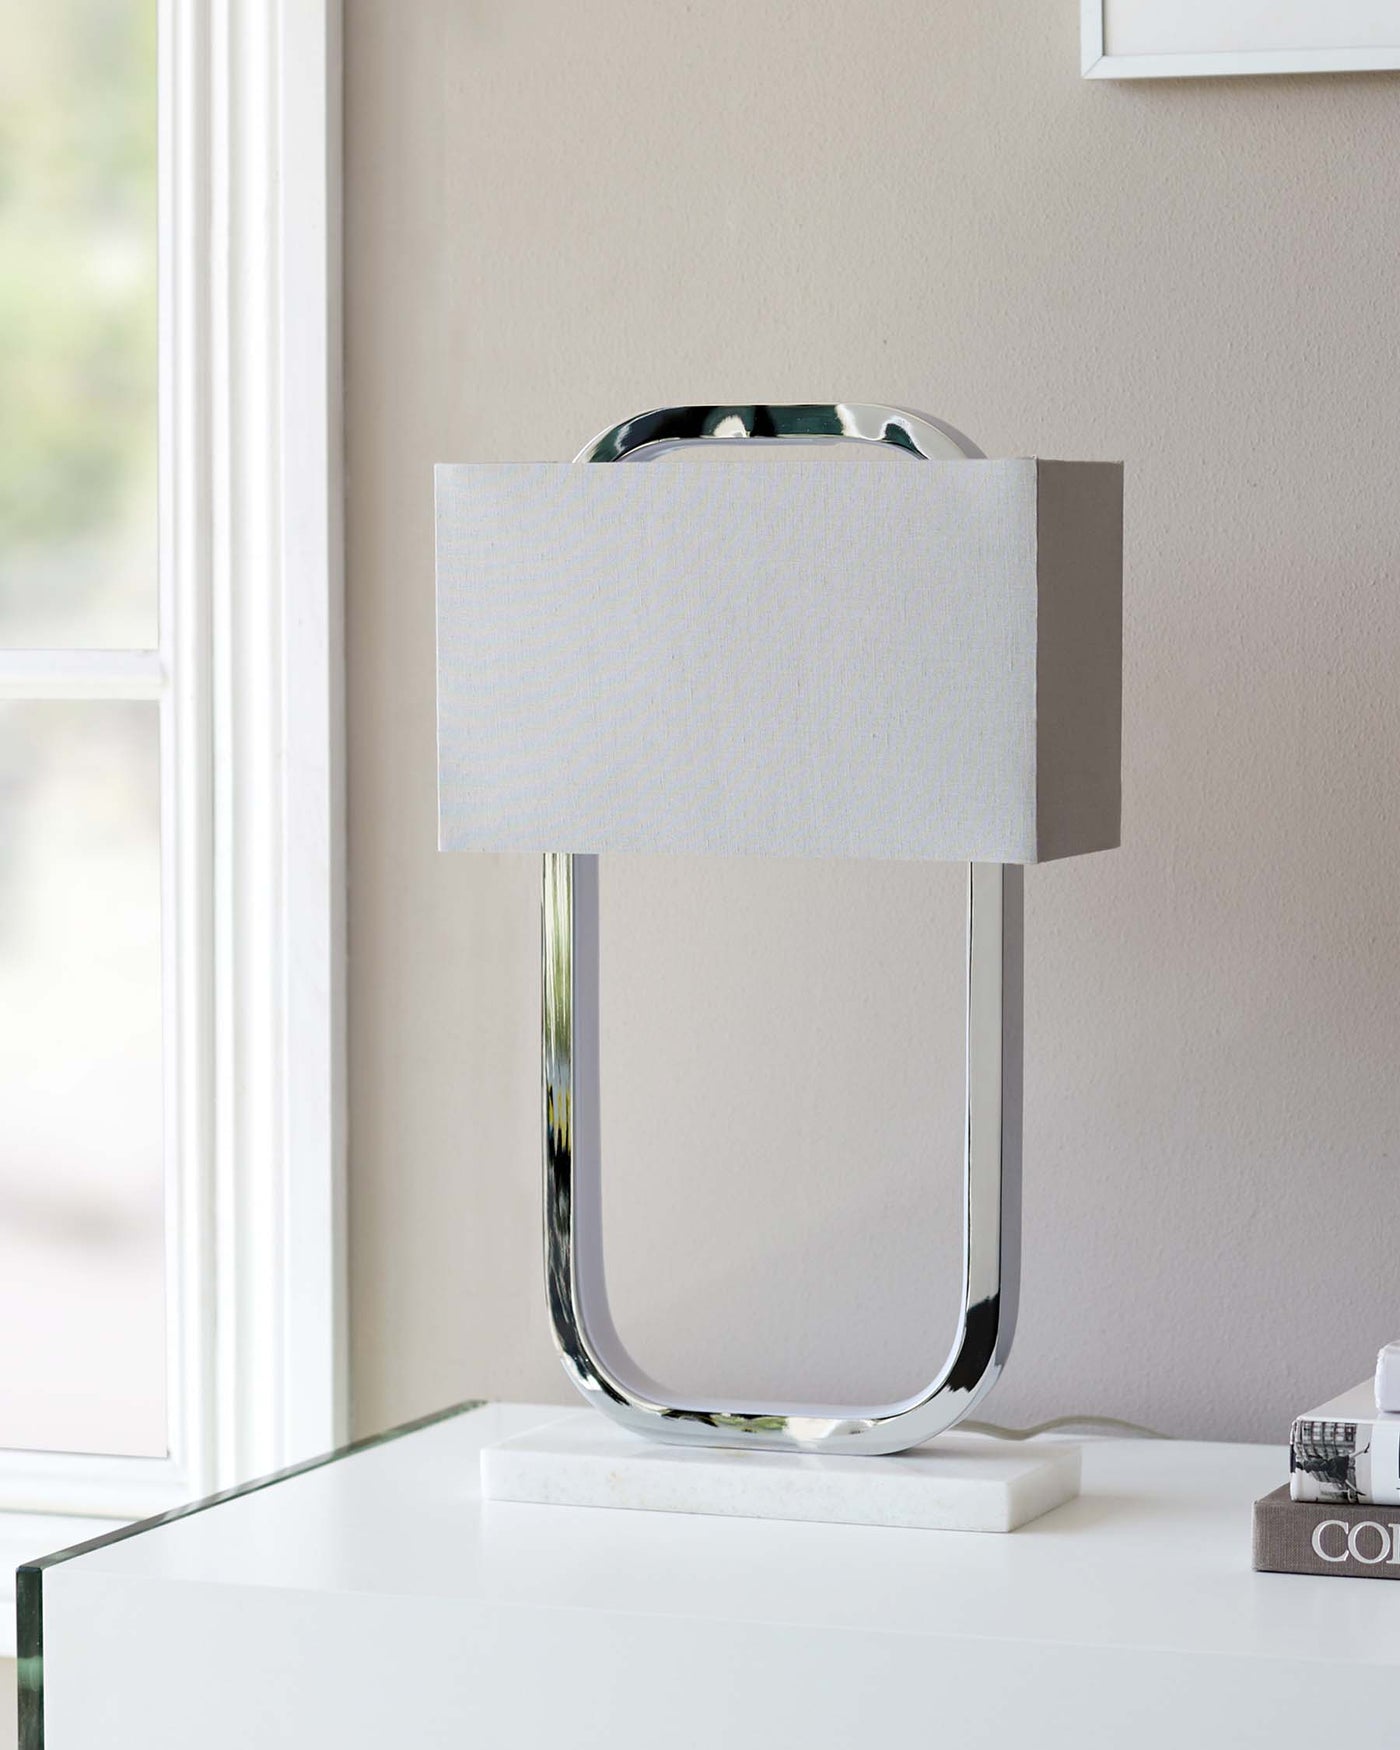 Modern table lamp with a chrome U-shaped base and white rectangular shade on a reflective white surface.